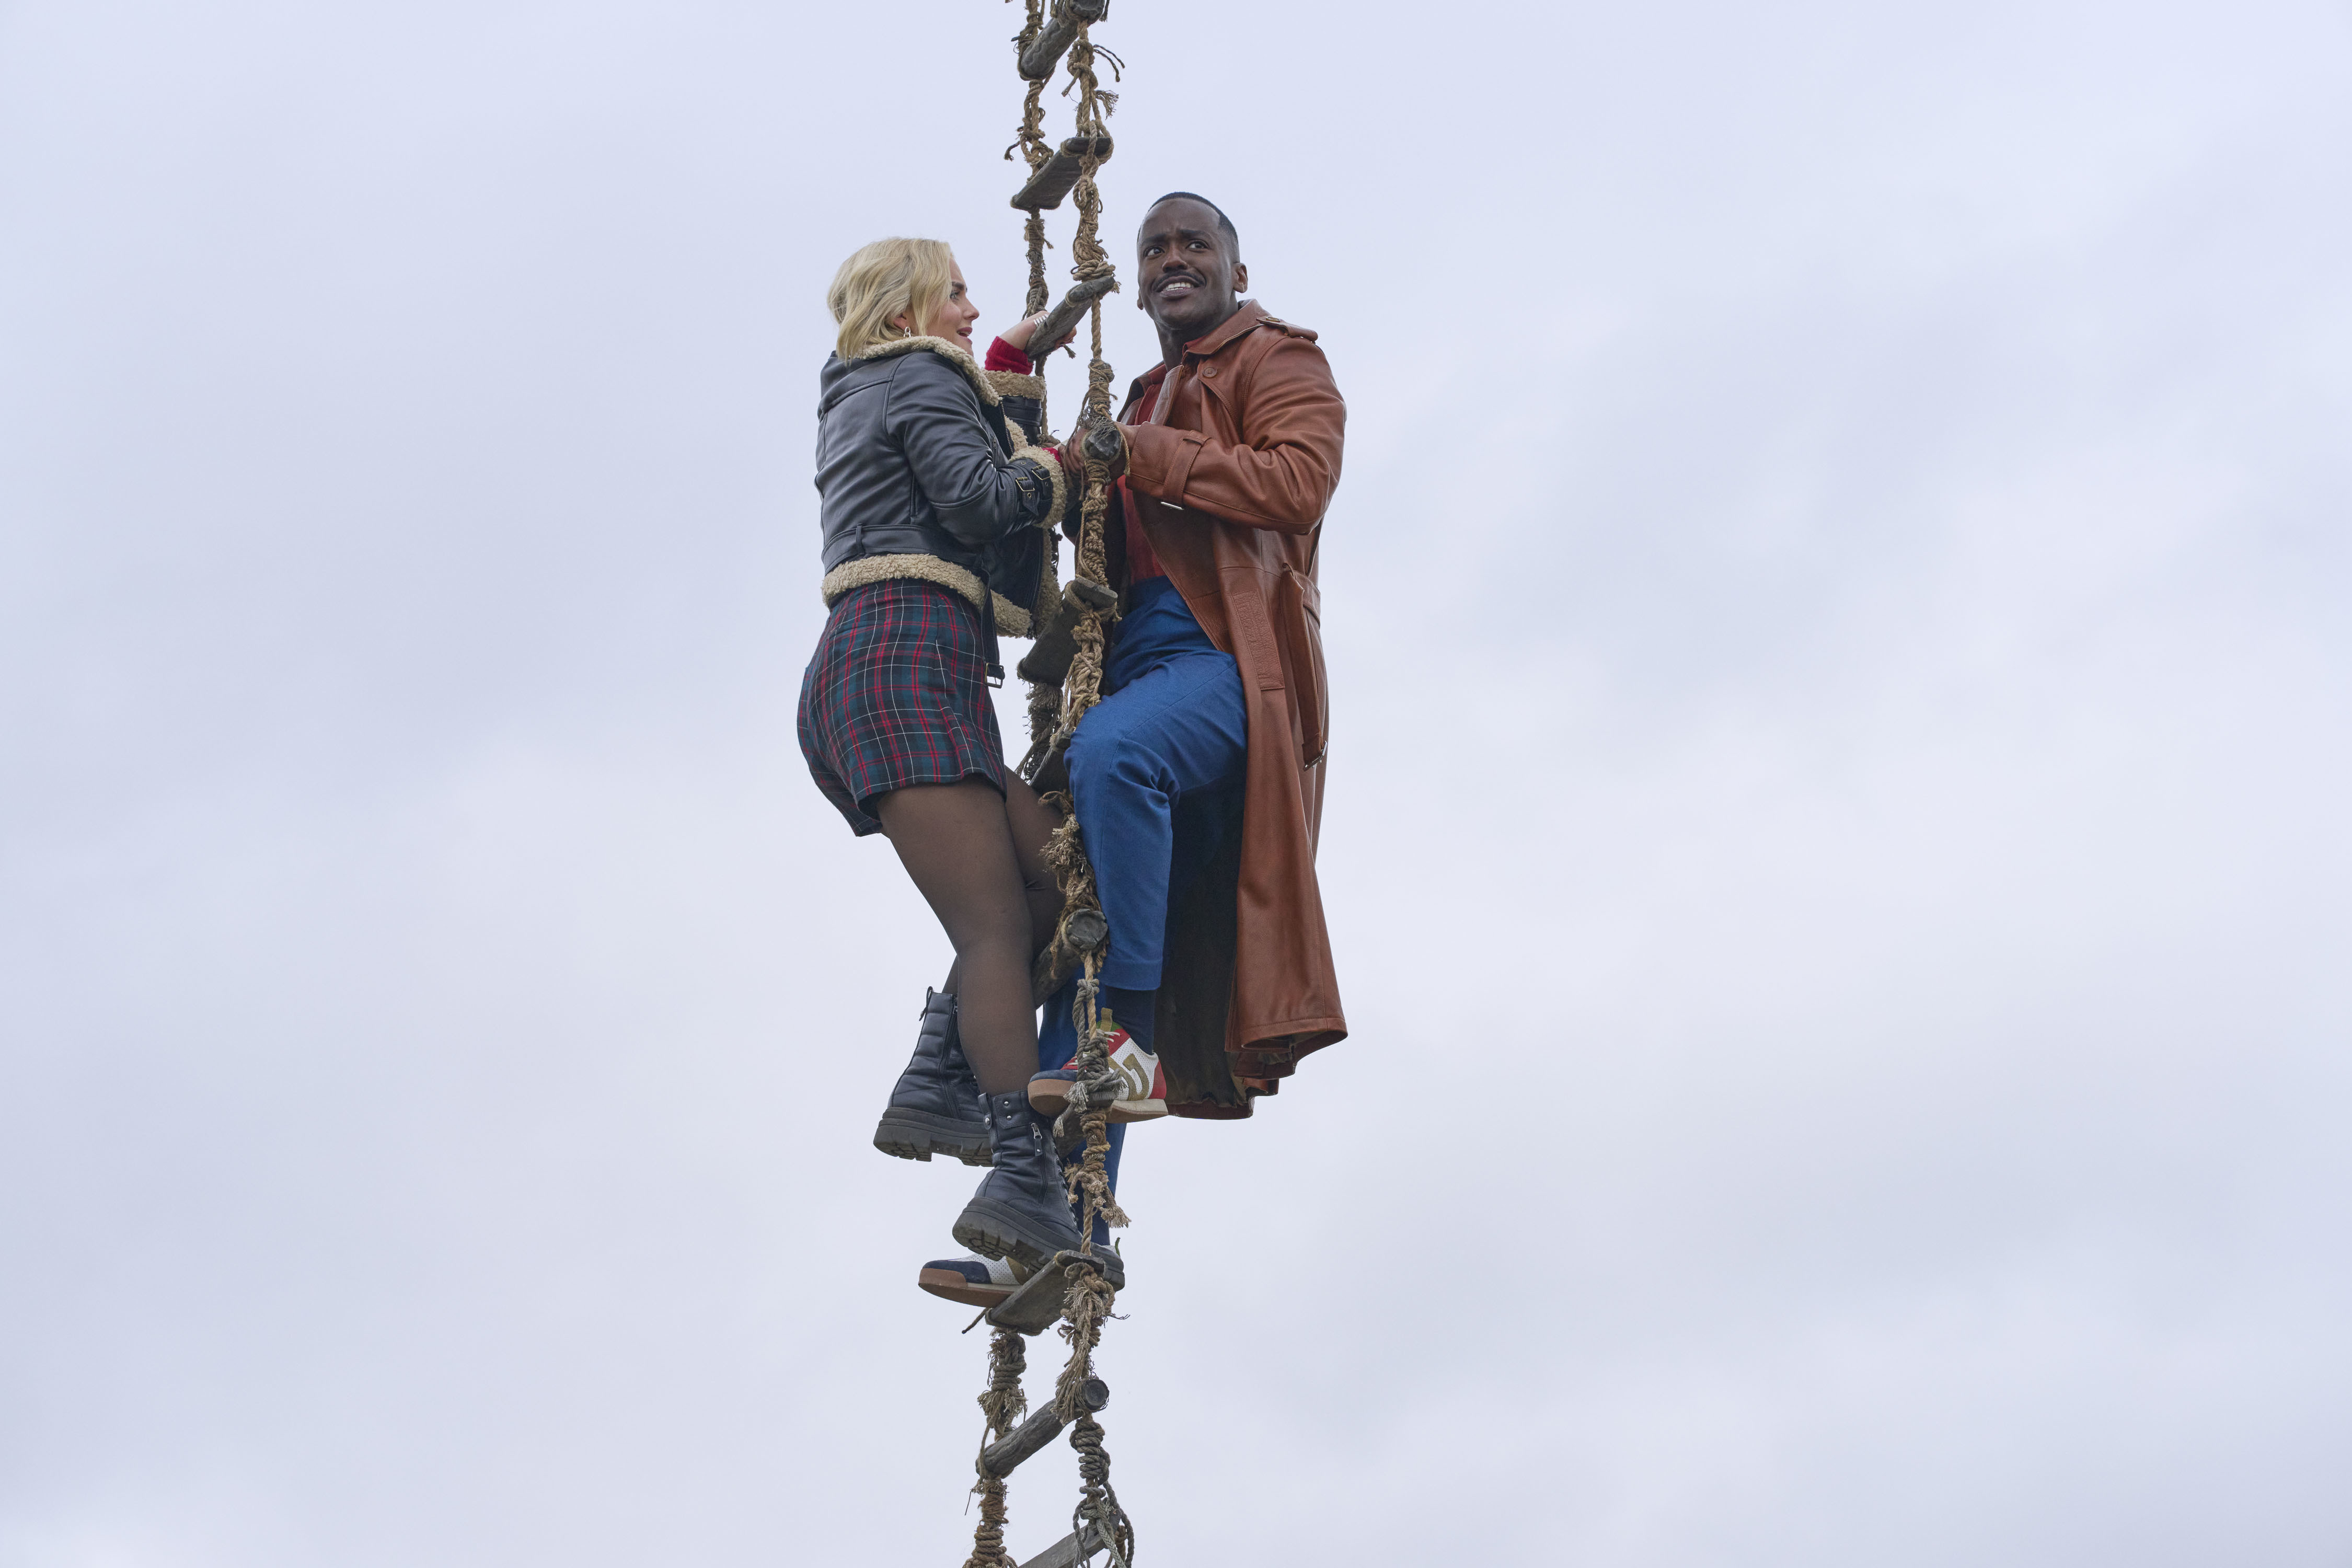 The Doctor and Ruby hold onto the rope ladder.